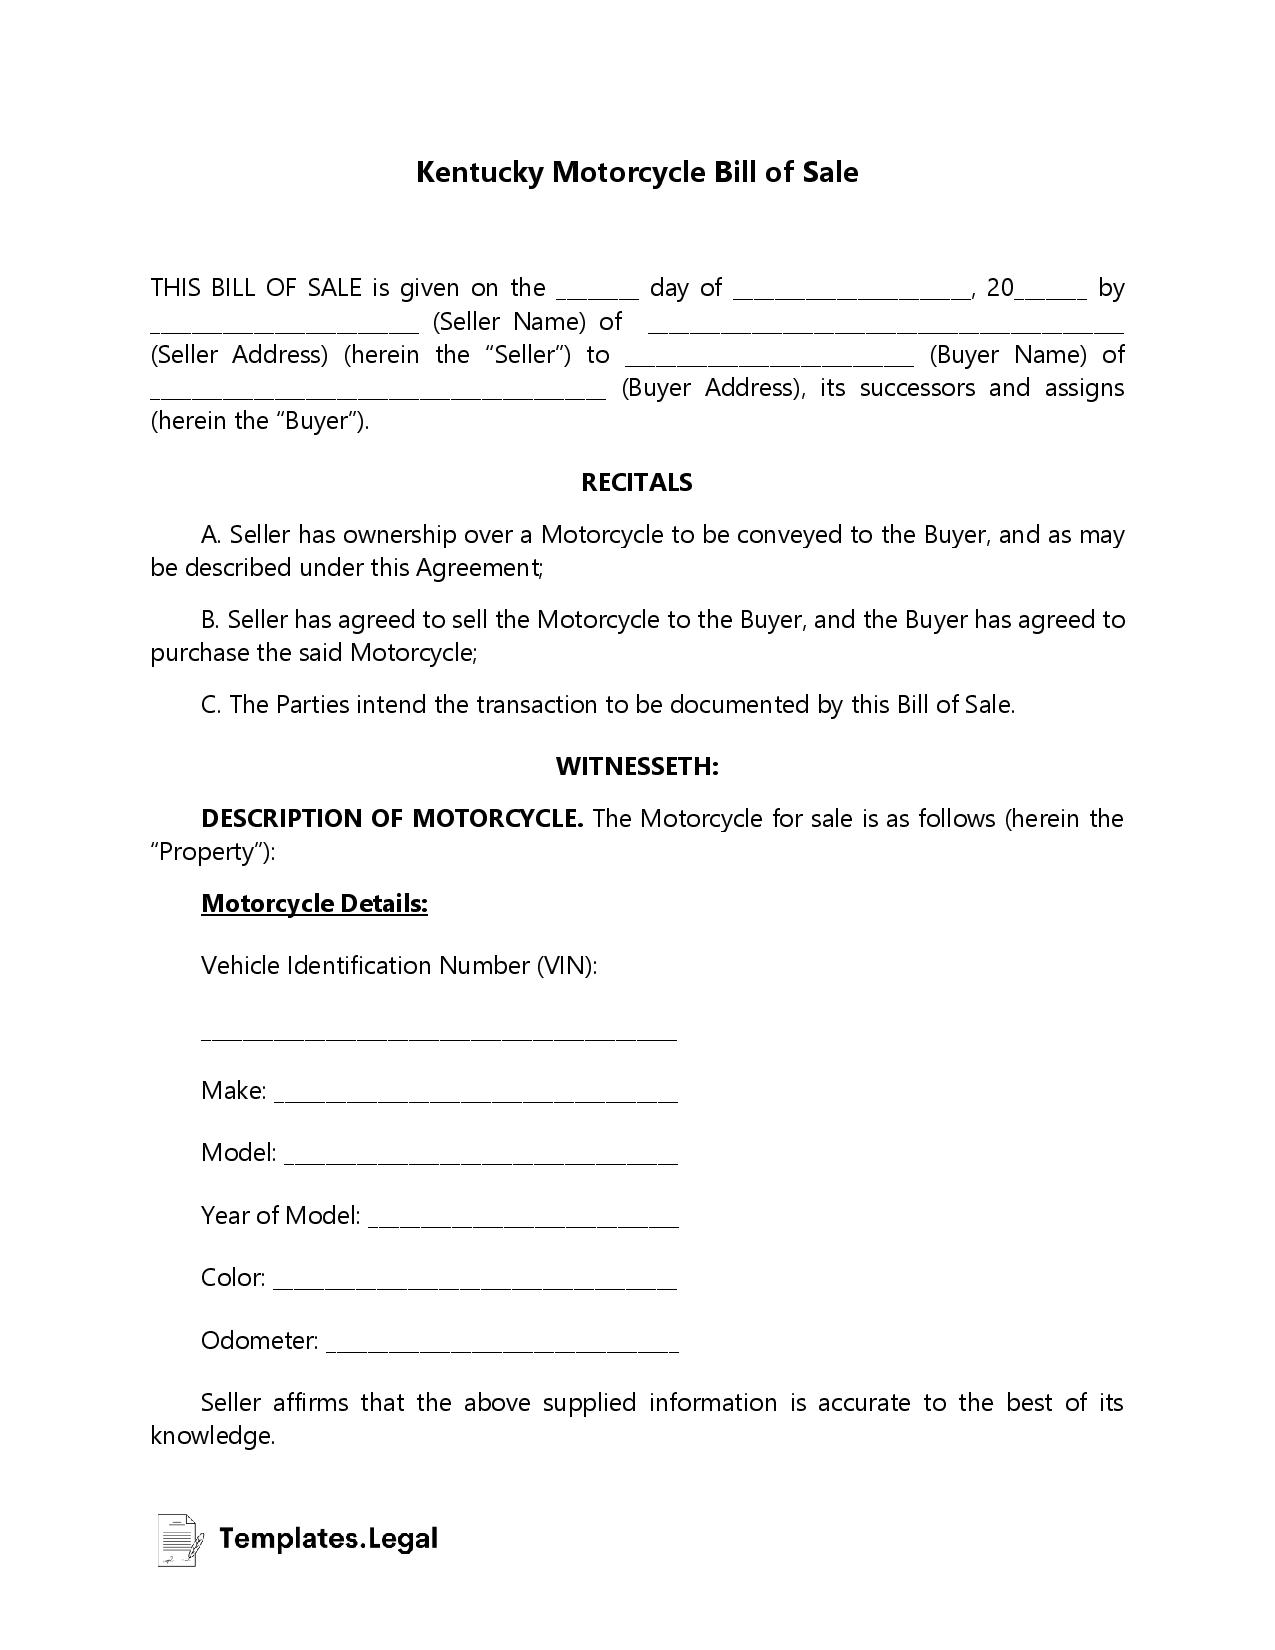 Kentucky Motorcycle Bill of Sale - Templates.Legal